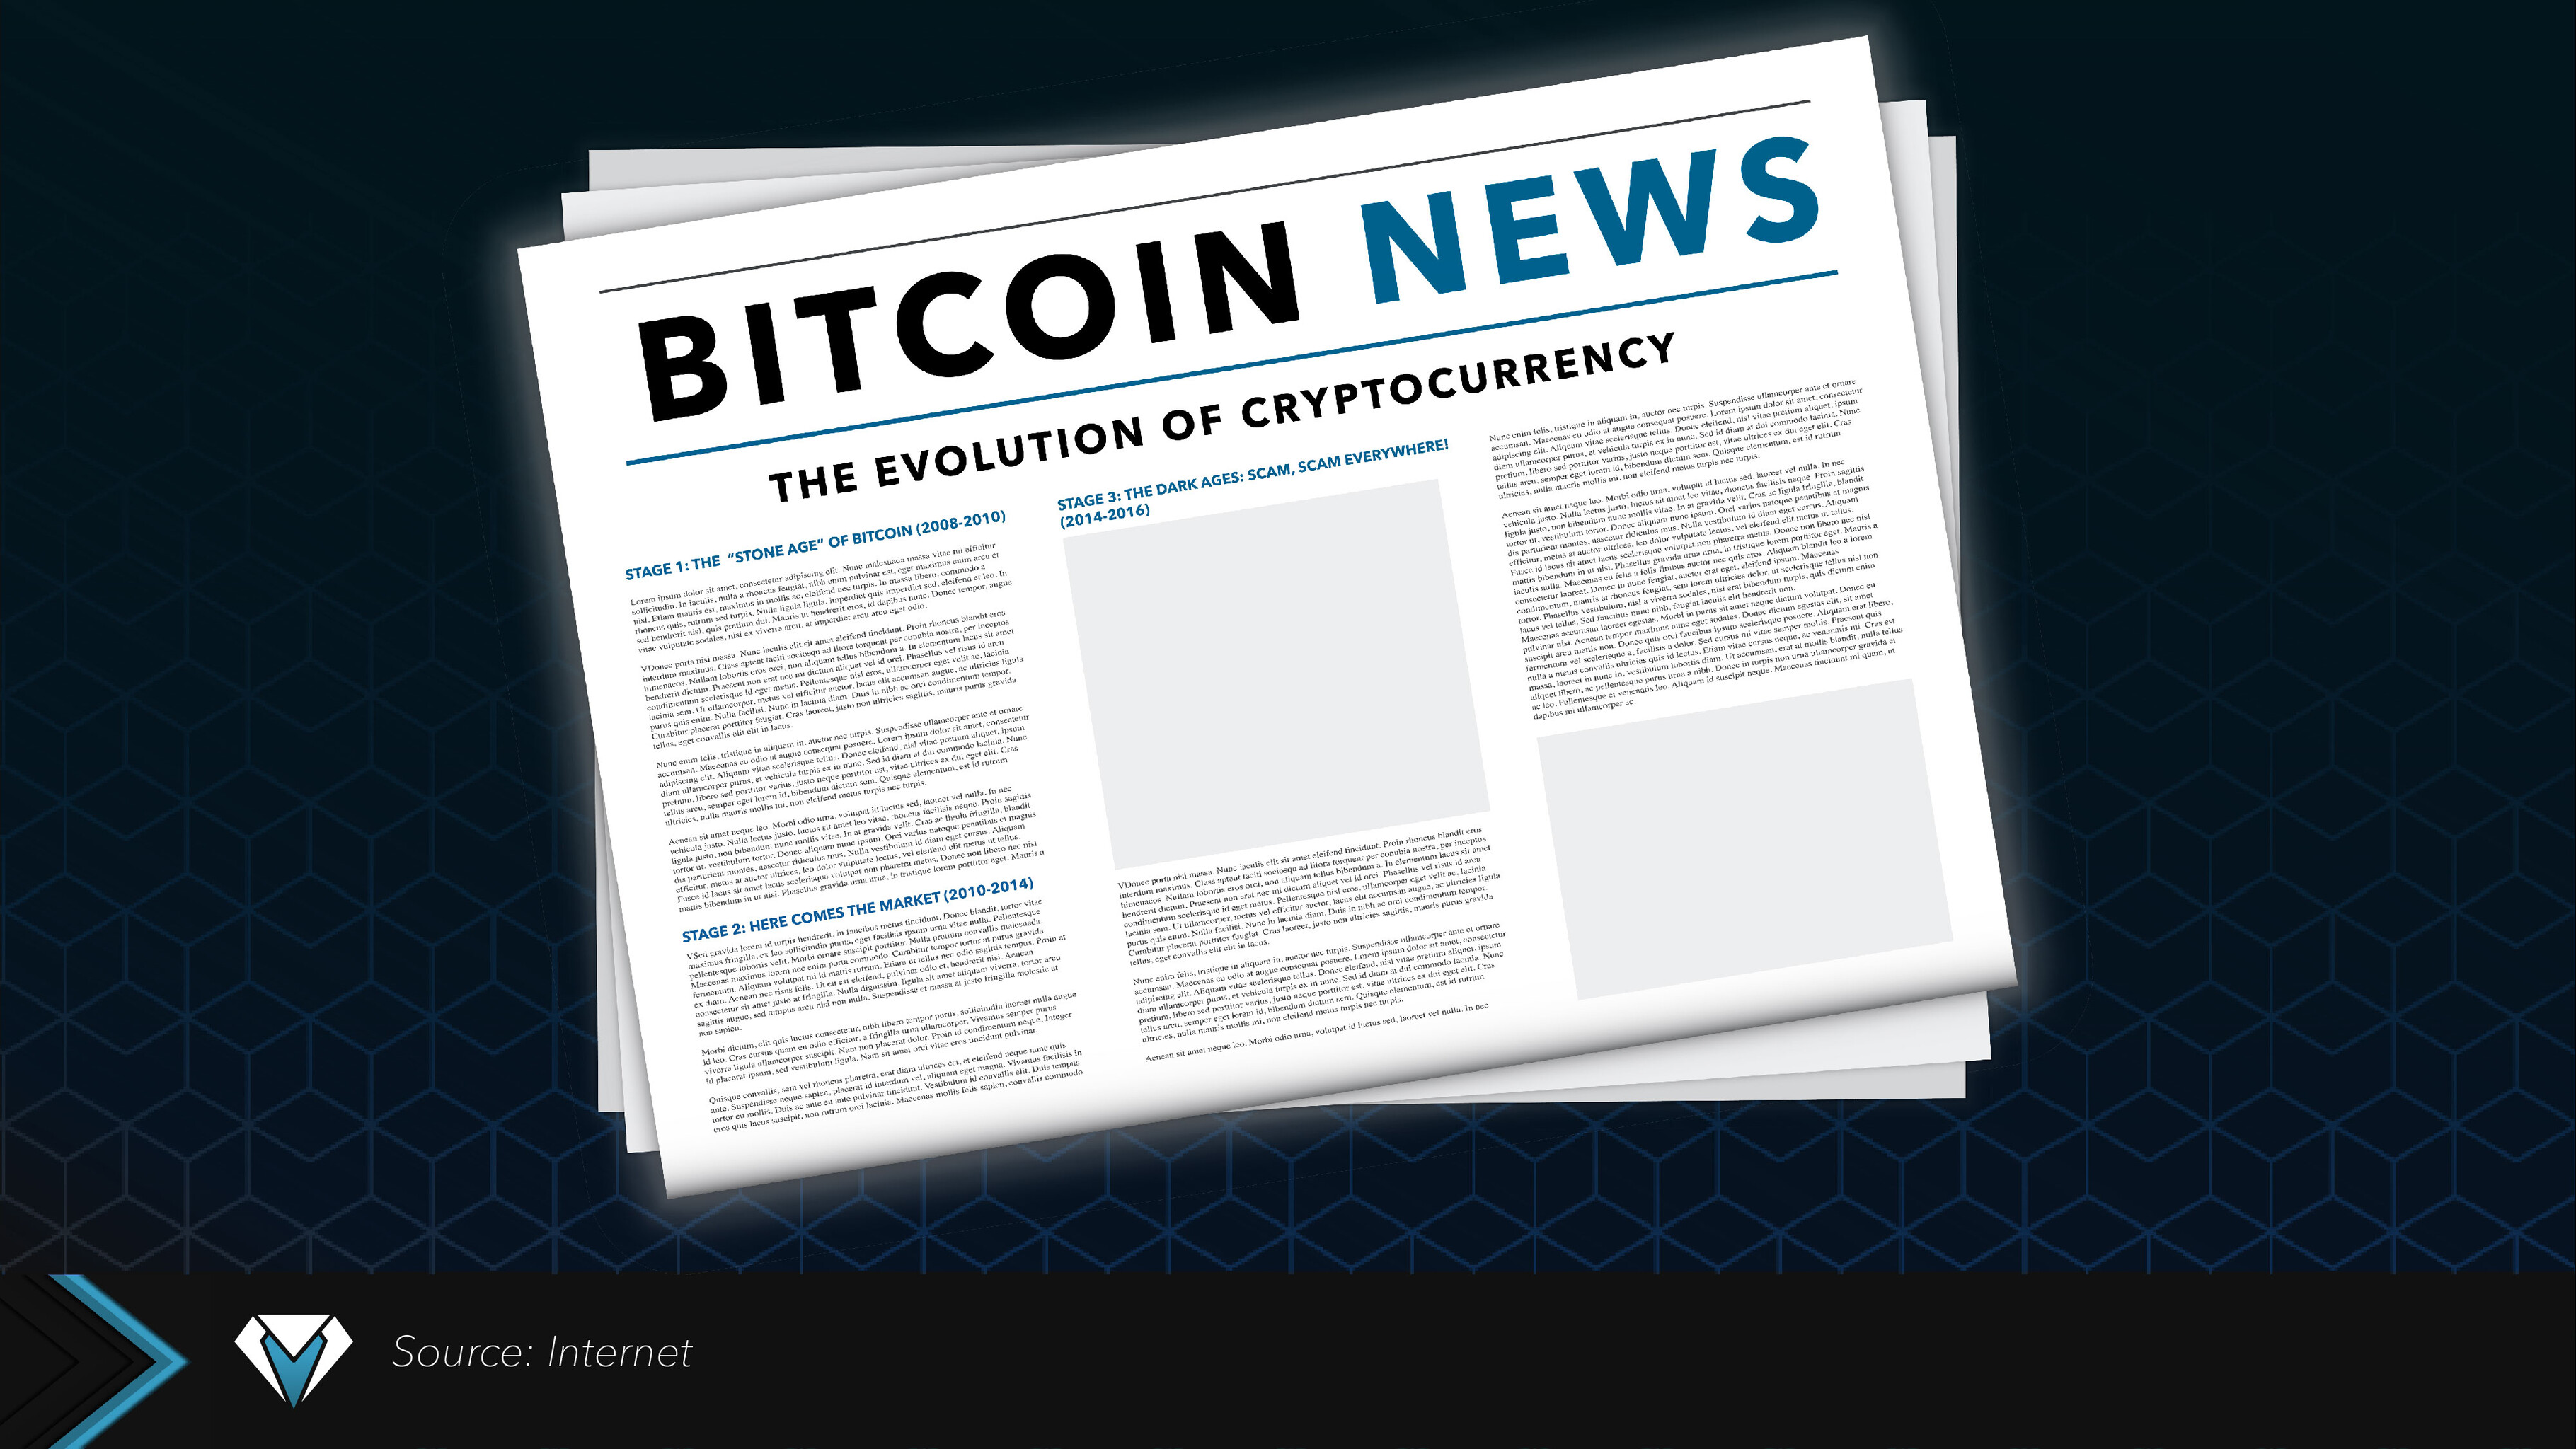 The Evolution of Cryptocurrency Series The Progress-02.jpg